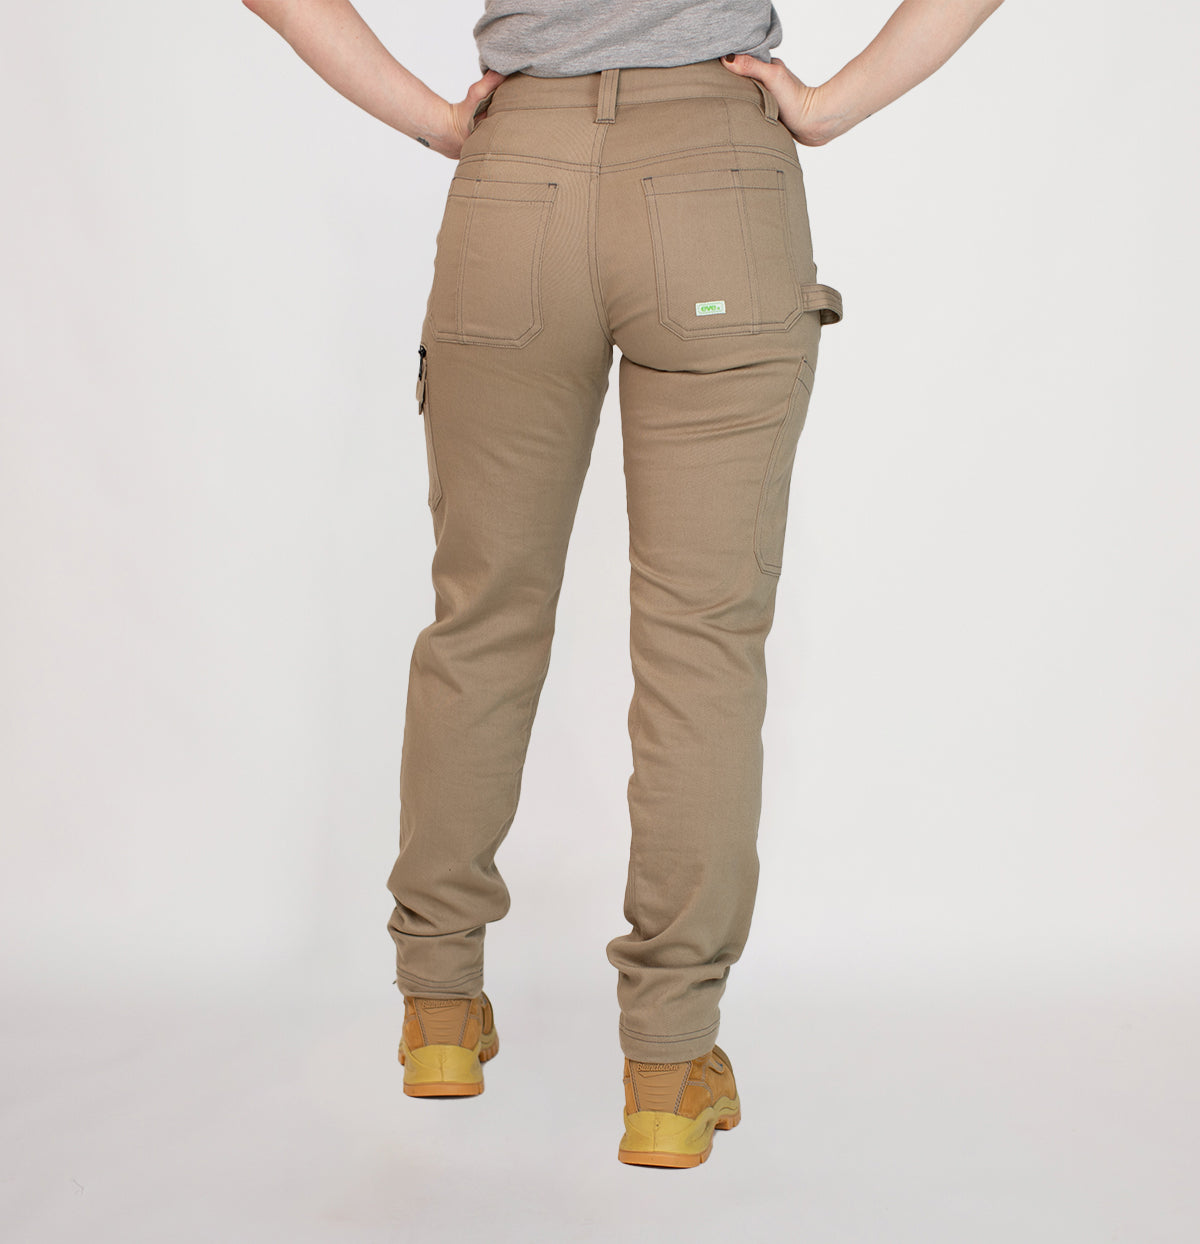 Amazons Second BestSelling Work Pants Are Only 33